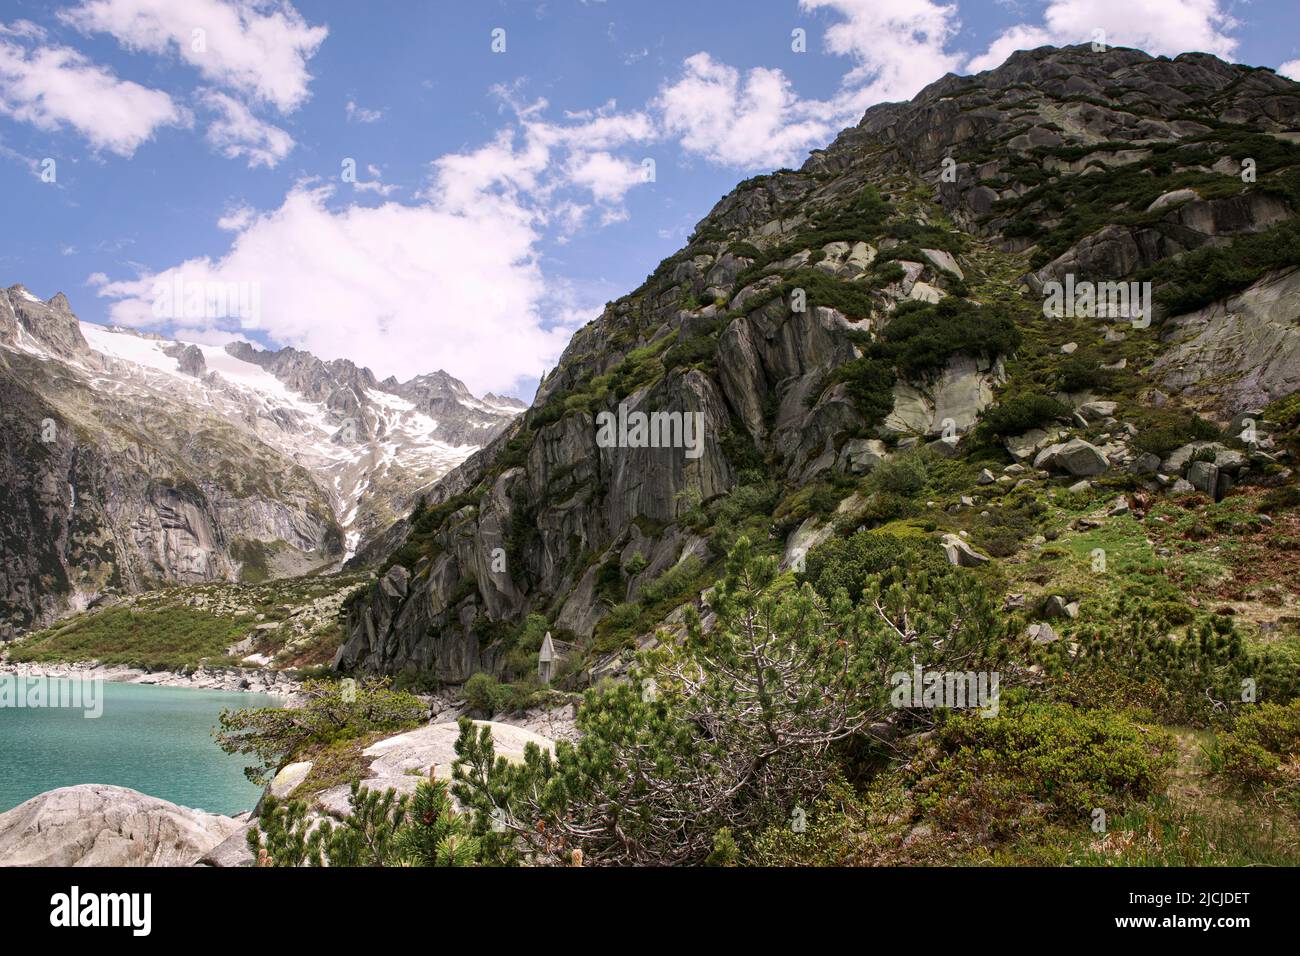 Paterns and textures on majestic rocky mountain. Landscape of swiss alps with green dense vegetation on a slope of a mountain above Gelmer Lake, Gelme Stock Photo